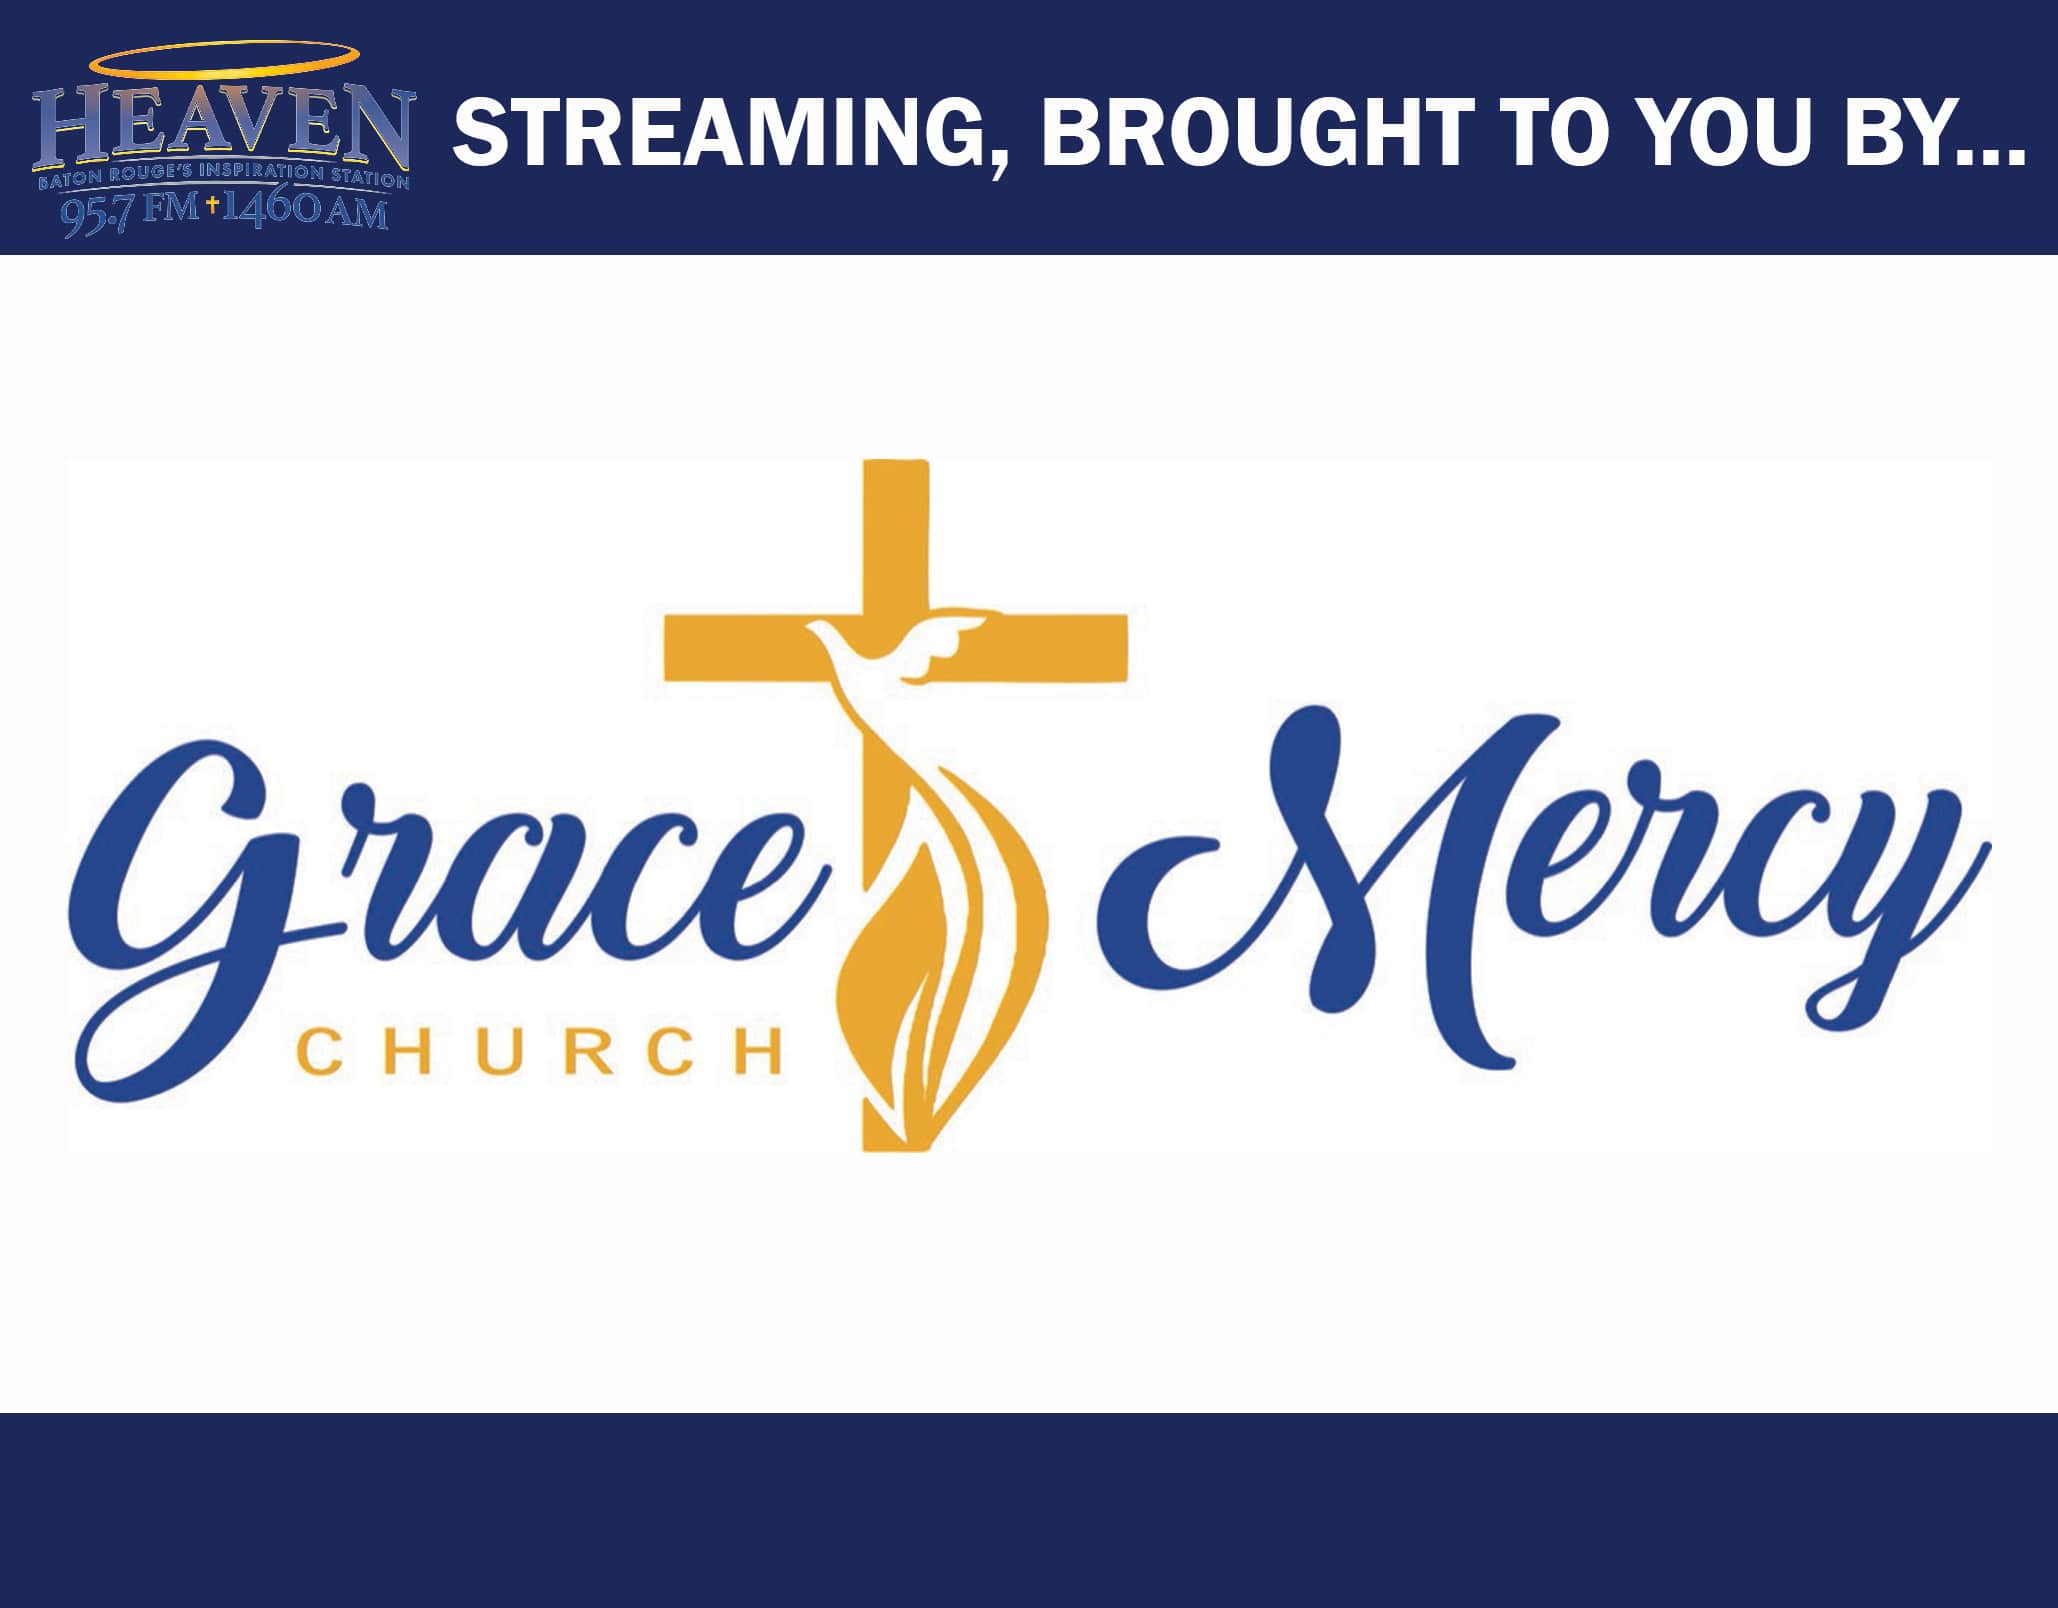 HEAVEN 95.7 STREAMING…BROUGHT TO YOU BY GRACE & MERCY CHURCH!